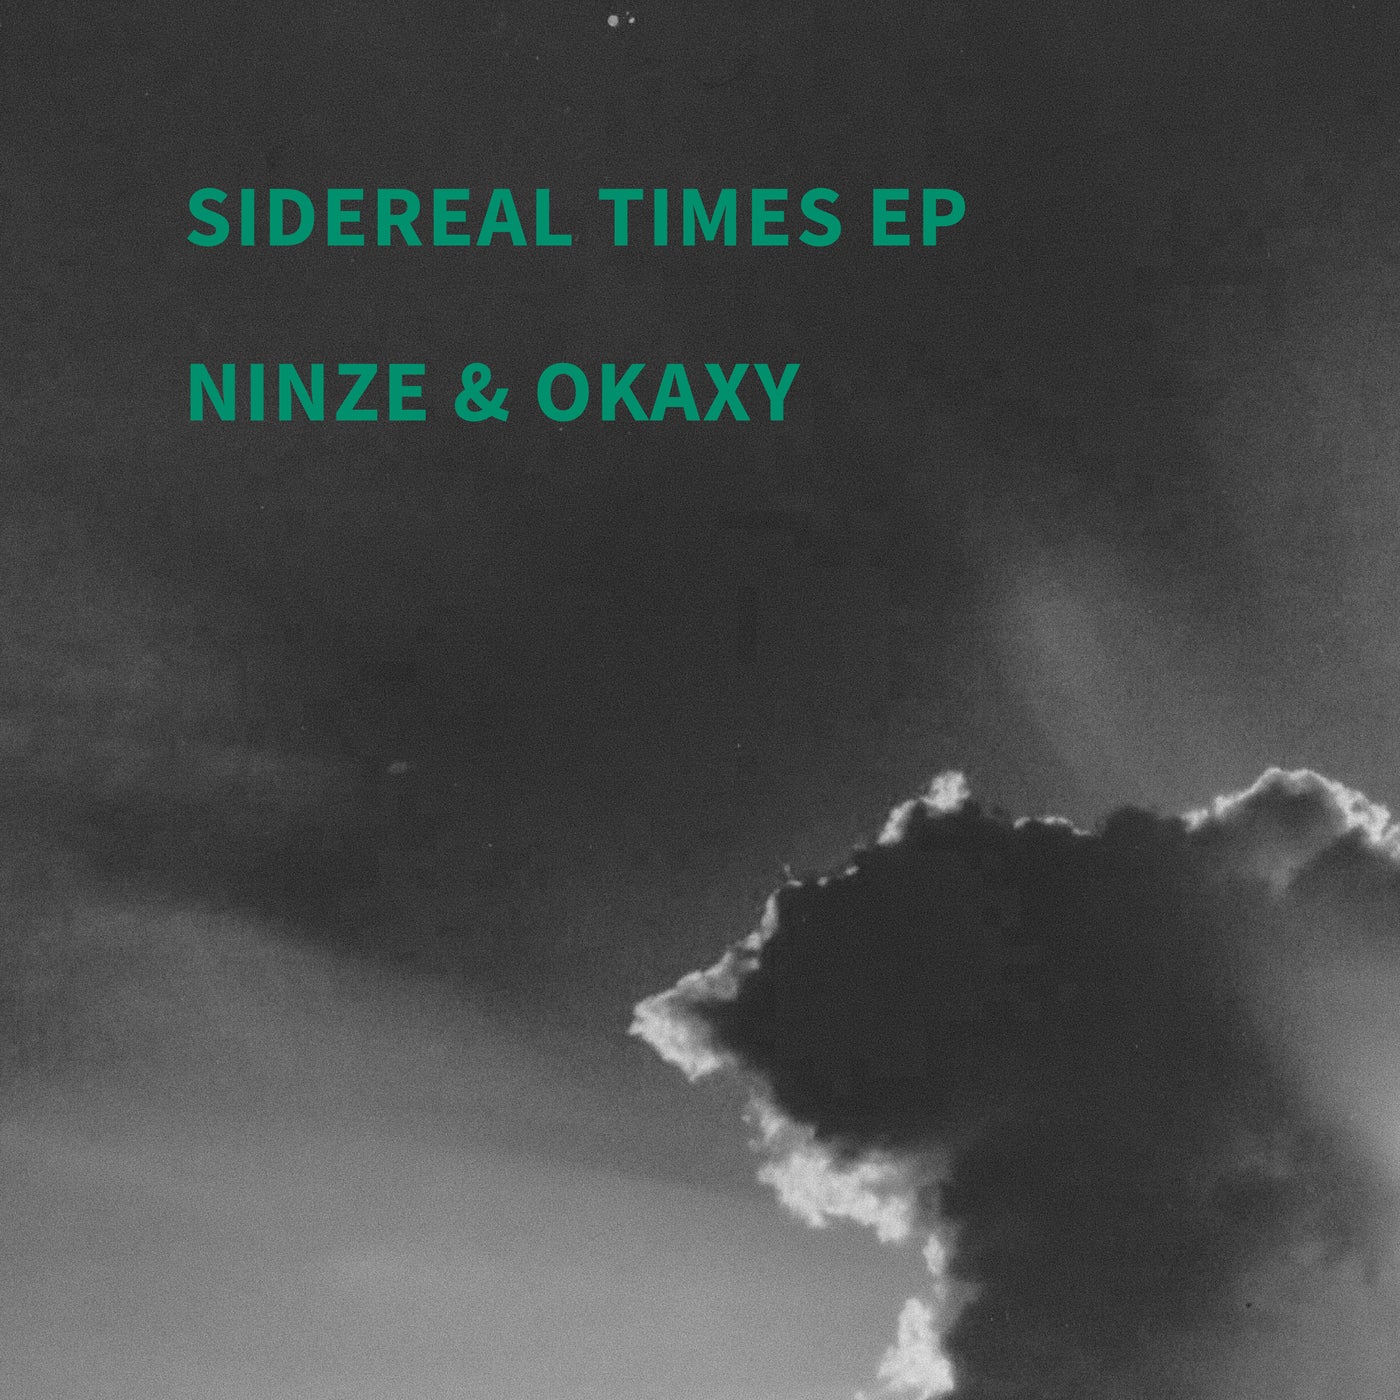 Sidereal Times